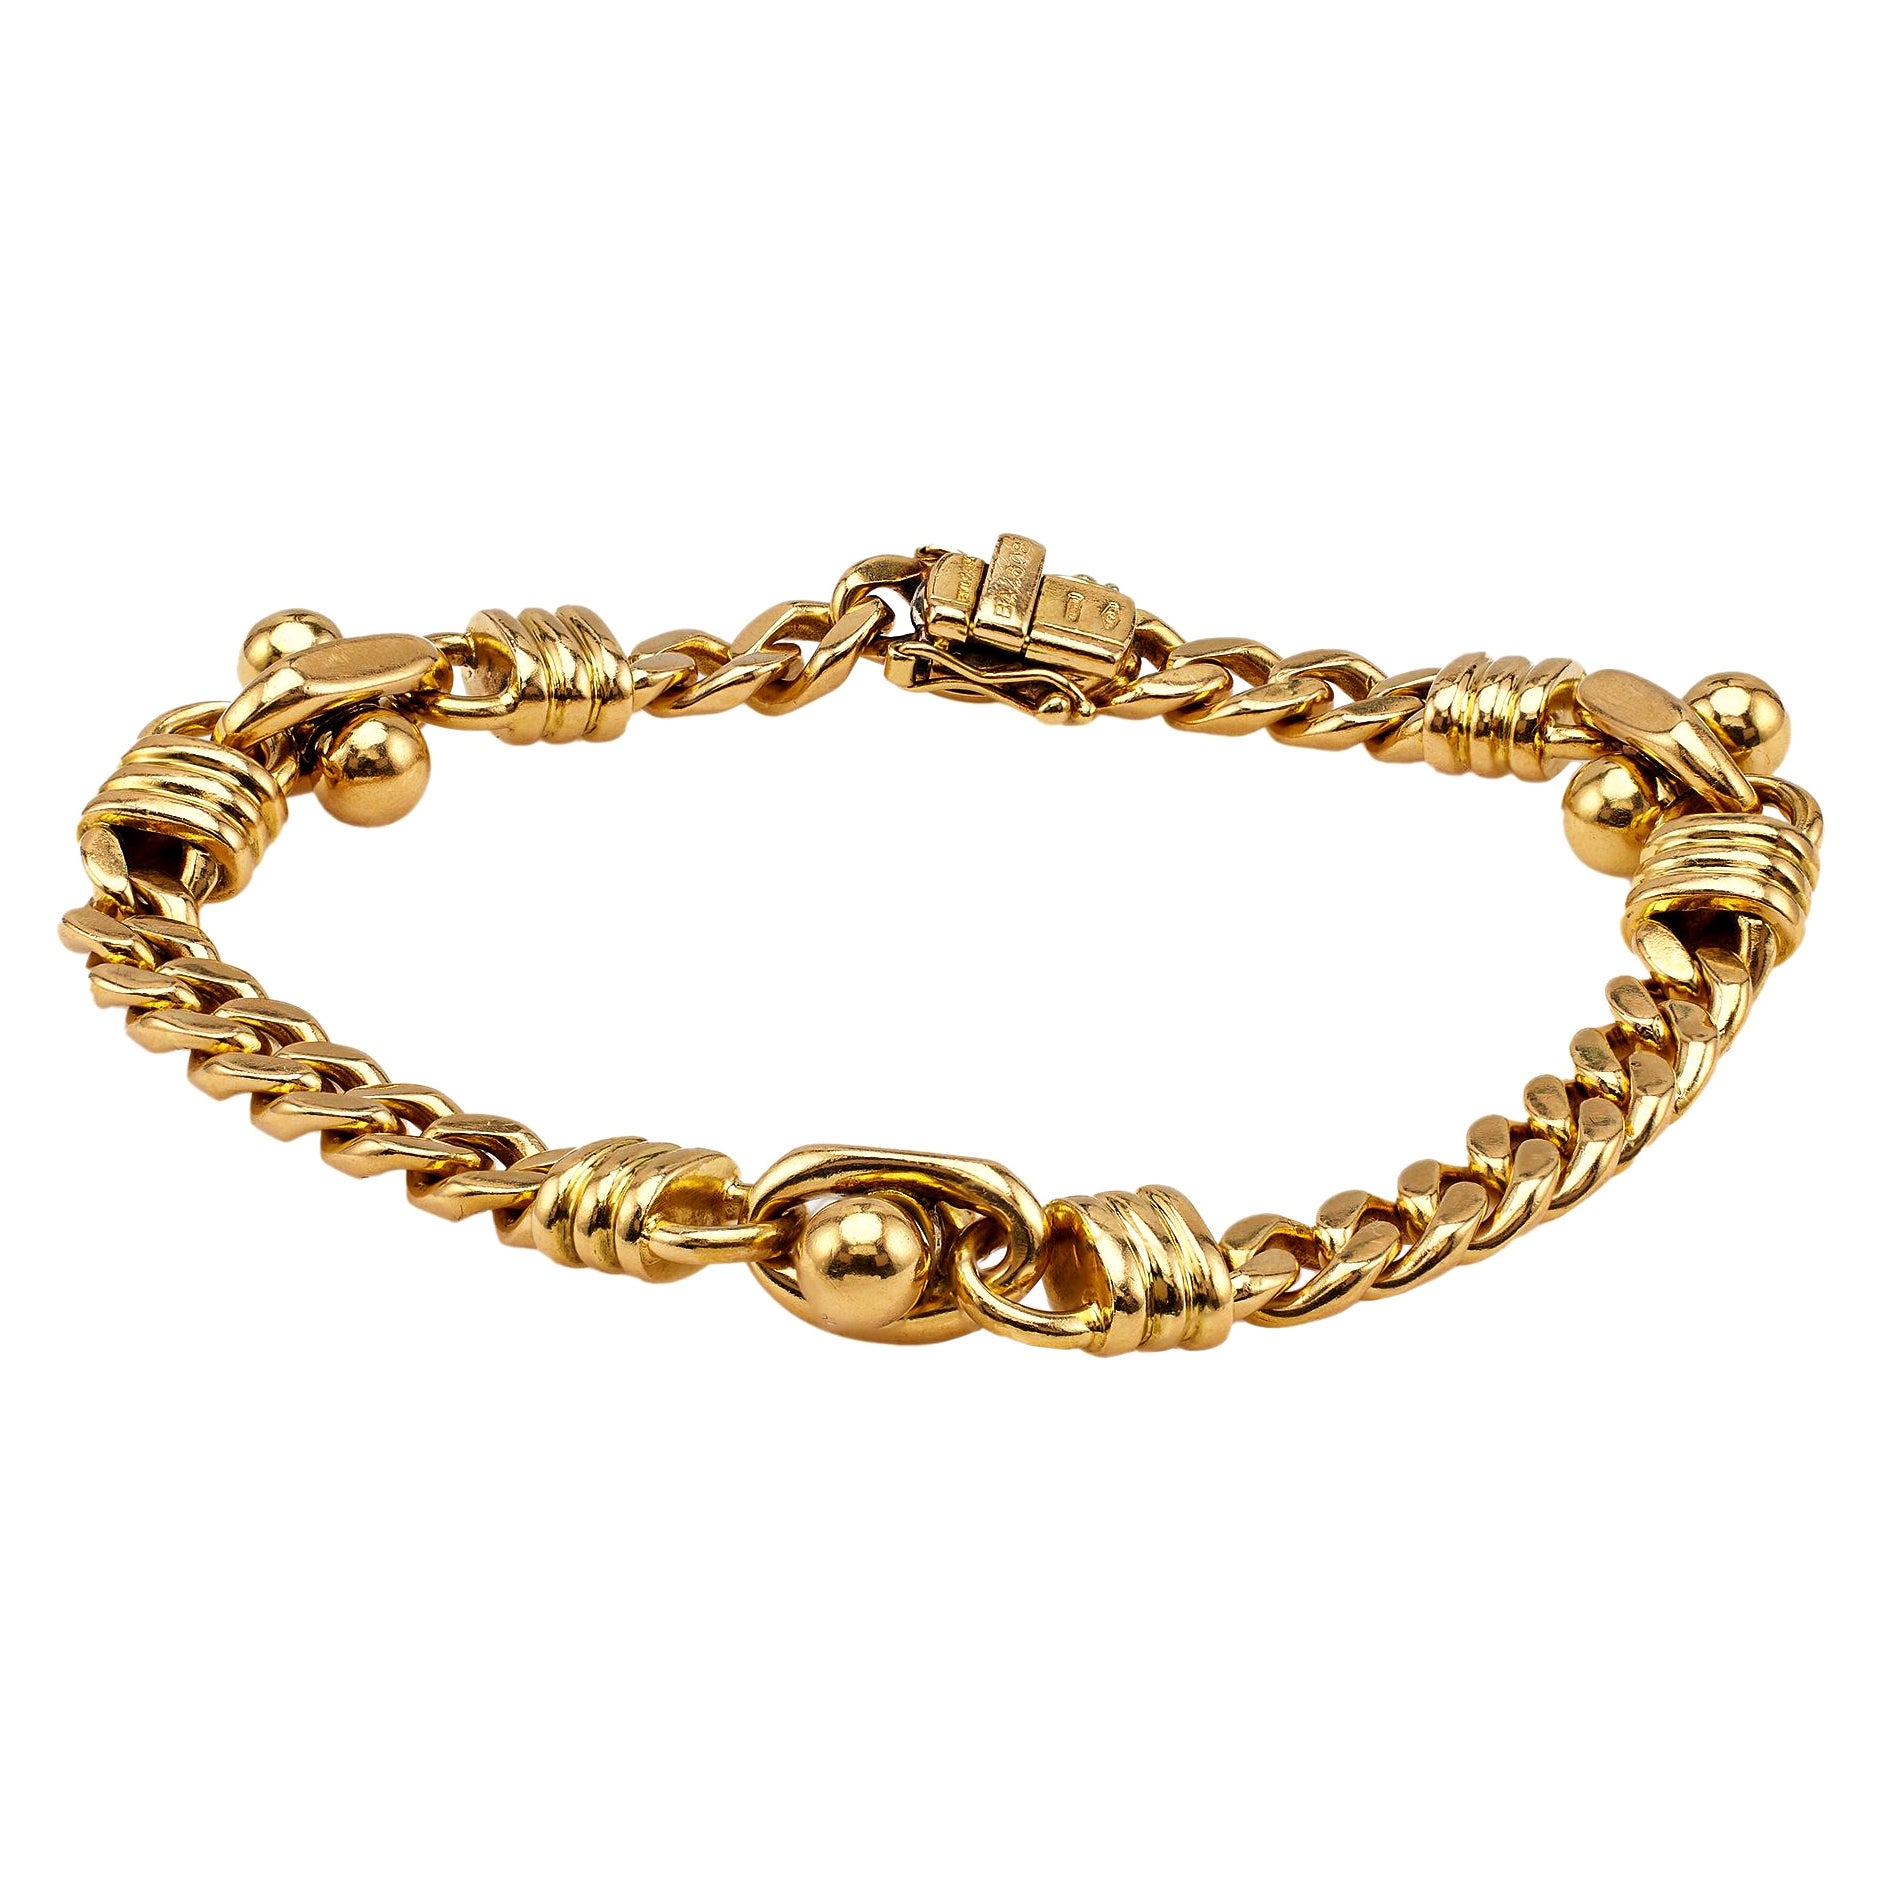 Vintage Bvlgari Italy 18k Yellow Gold Chain Link Bracelet For Sale